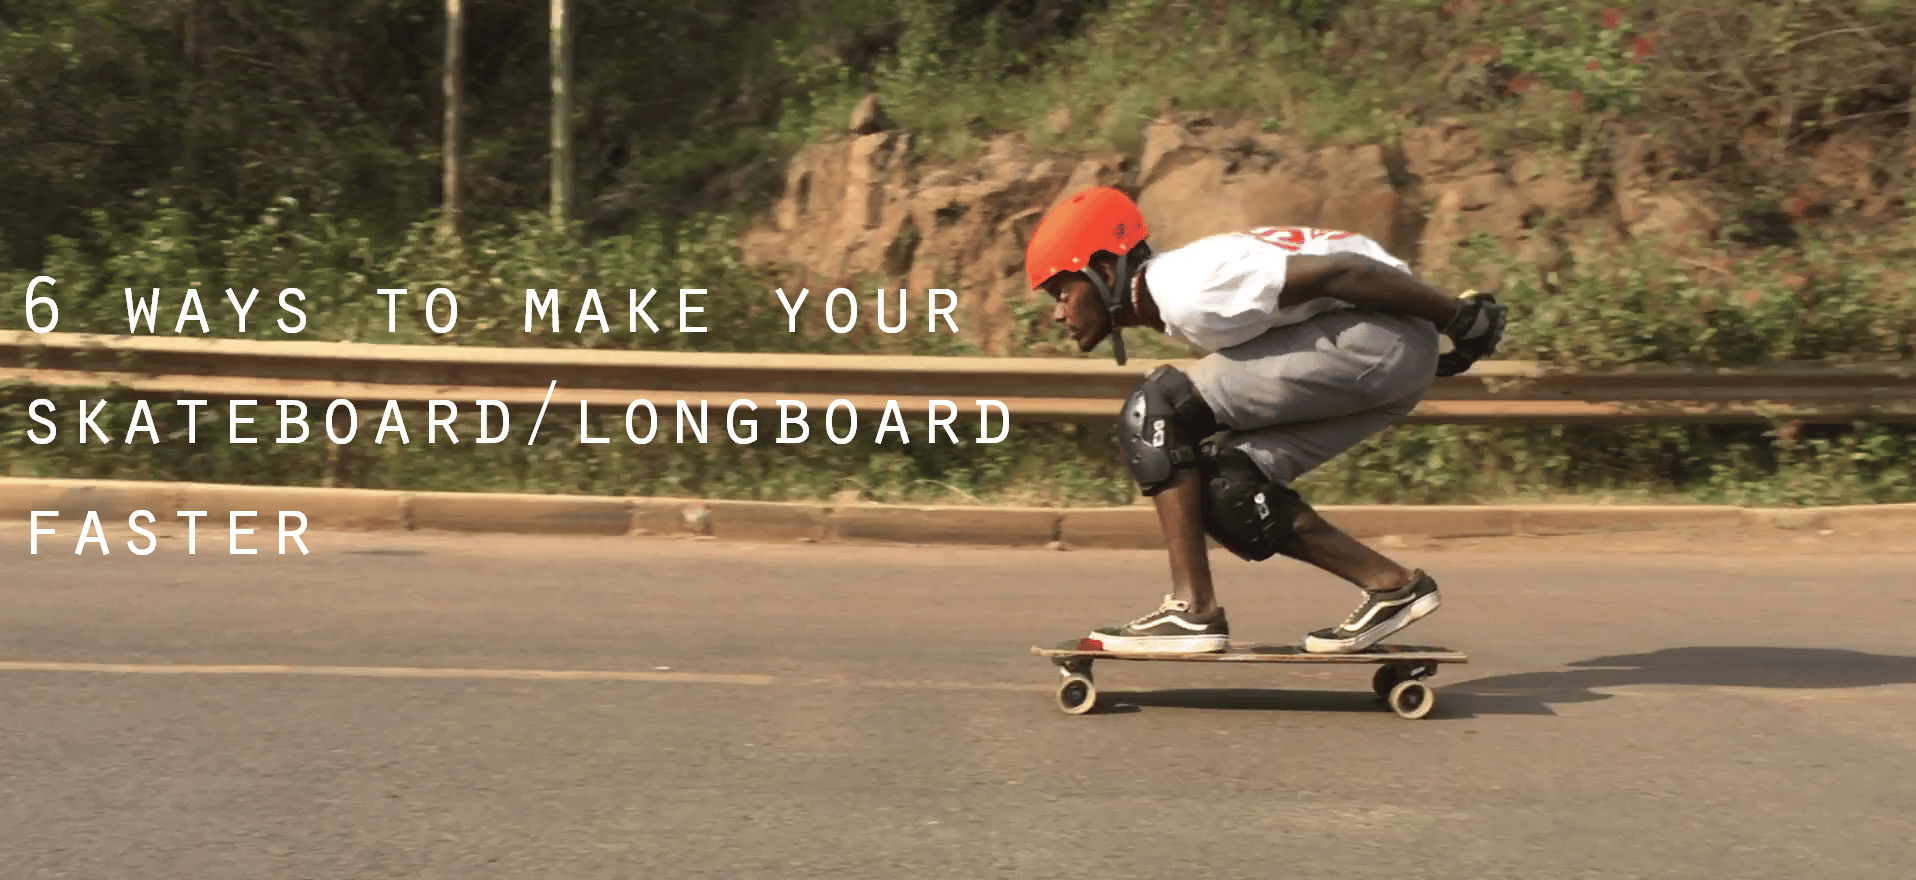 How To Take Care of Your Longboard - Make Long-Lasting